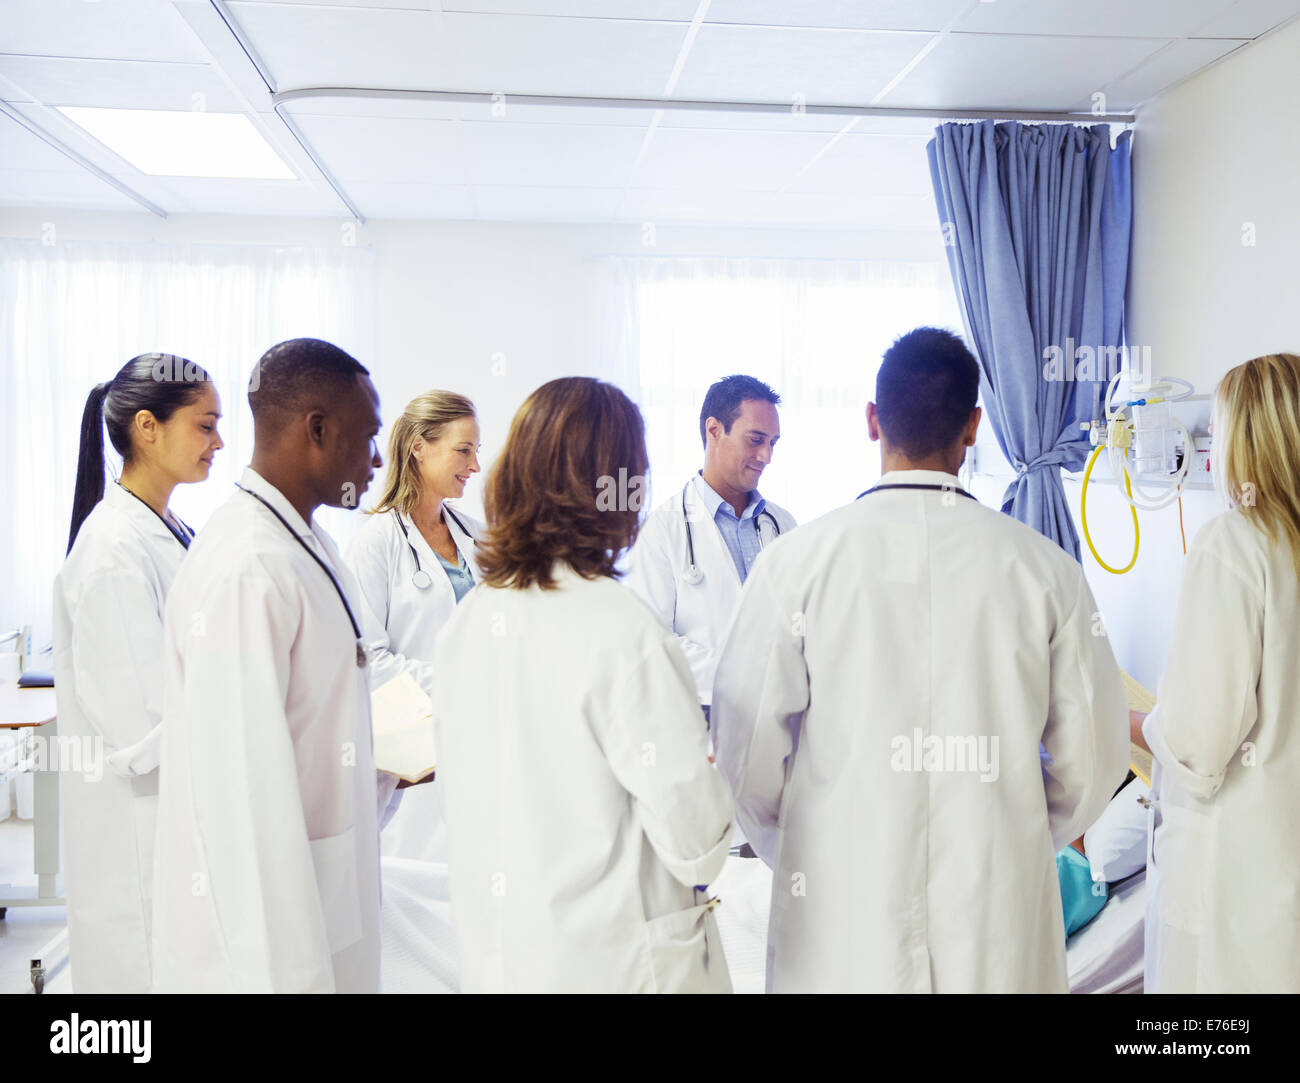 Doctor and residents examining patient in hospital Stock Photo